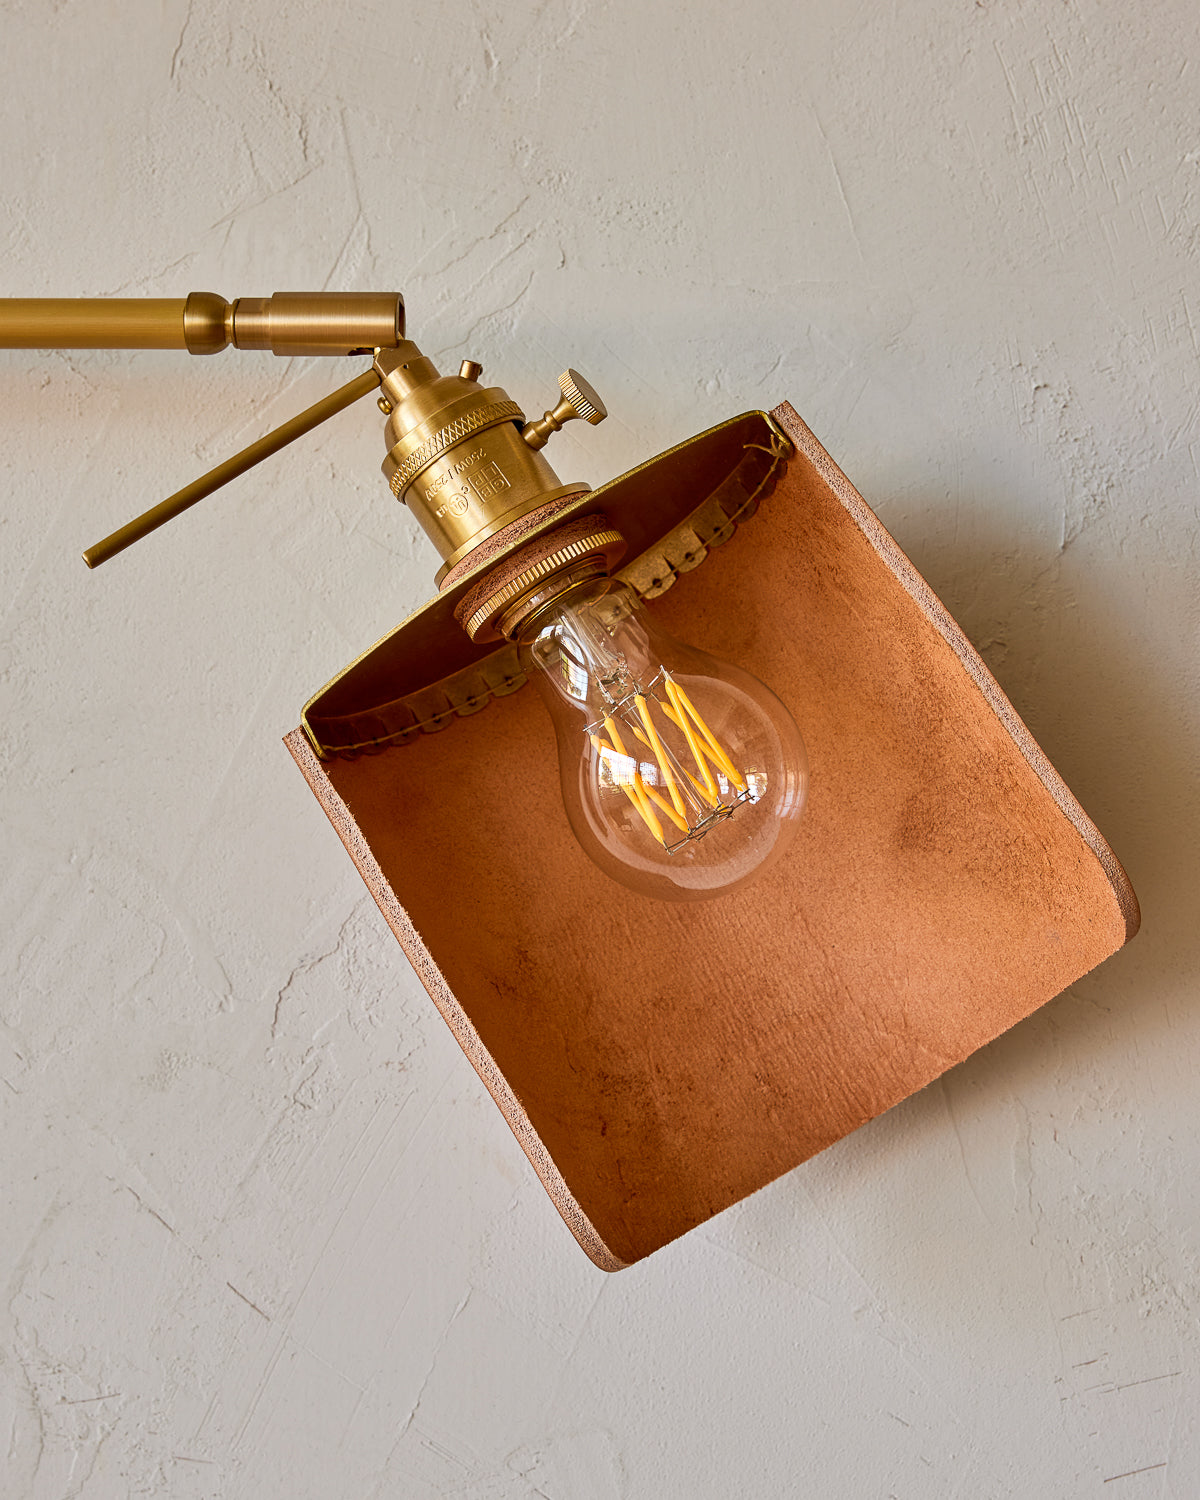 Curved tan leather and brass shade for articulating wall sconce